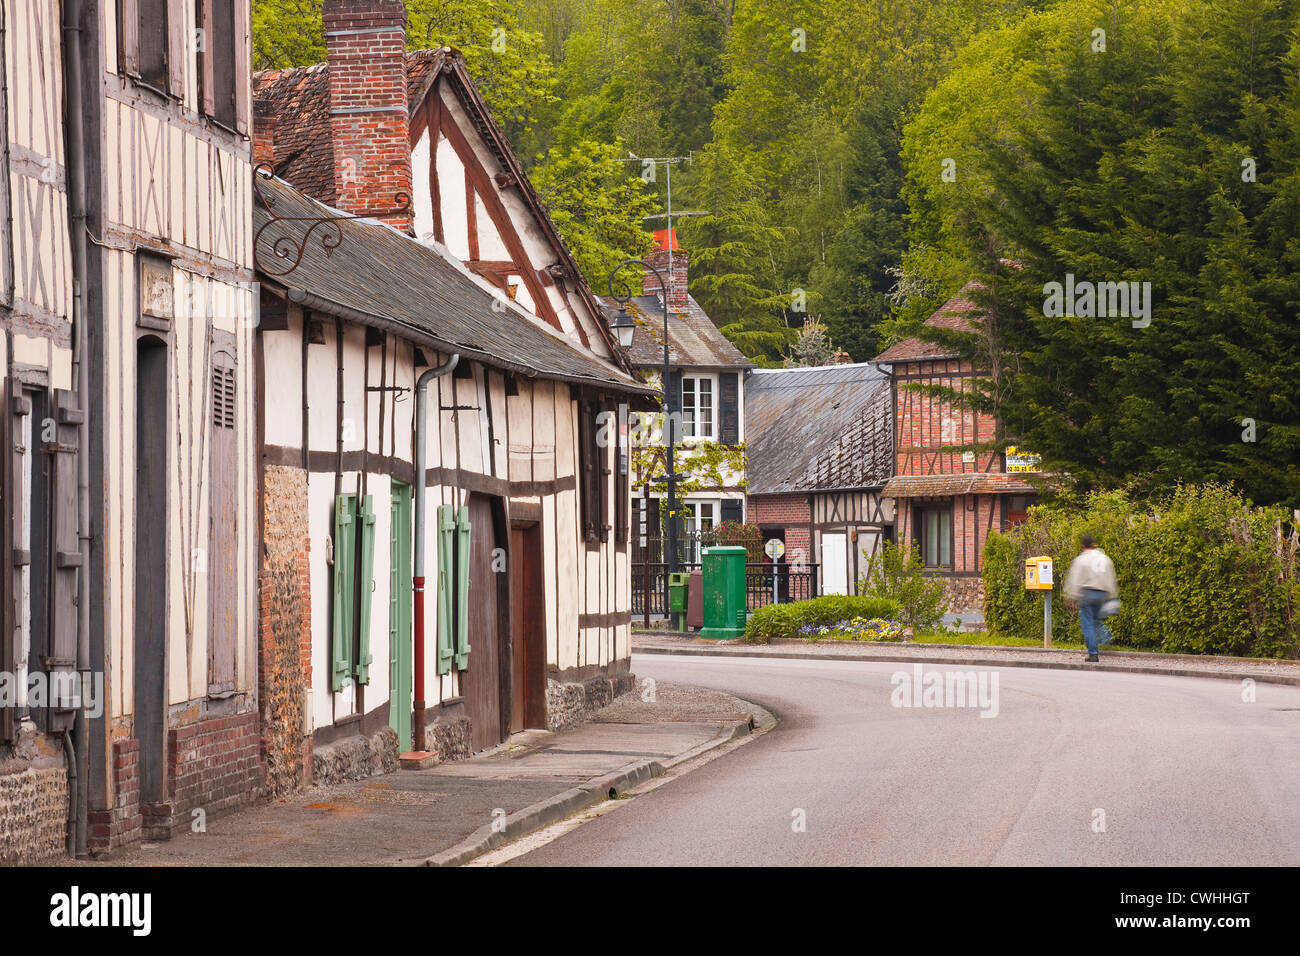 Half timebered houses in the village of Lyons La Foret, France. Stock Photo